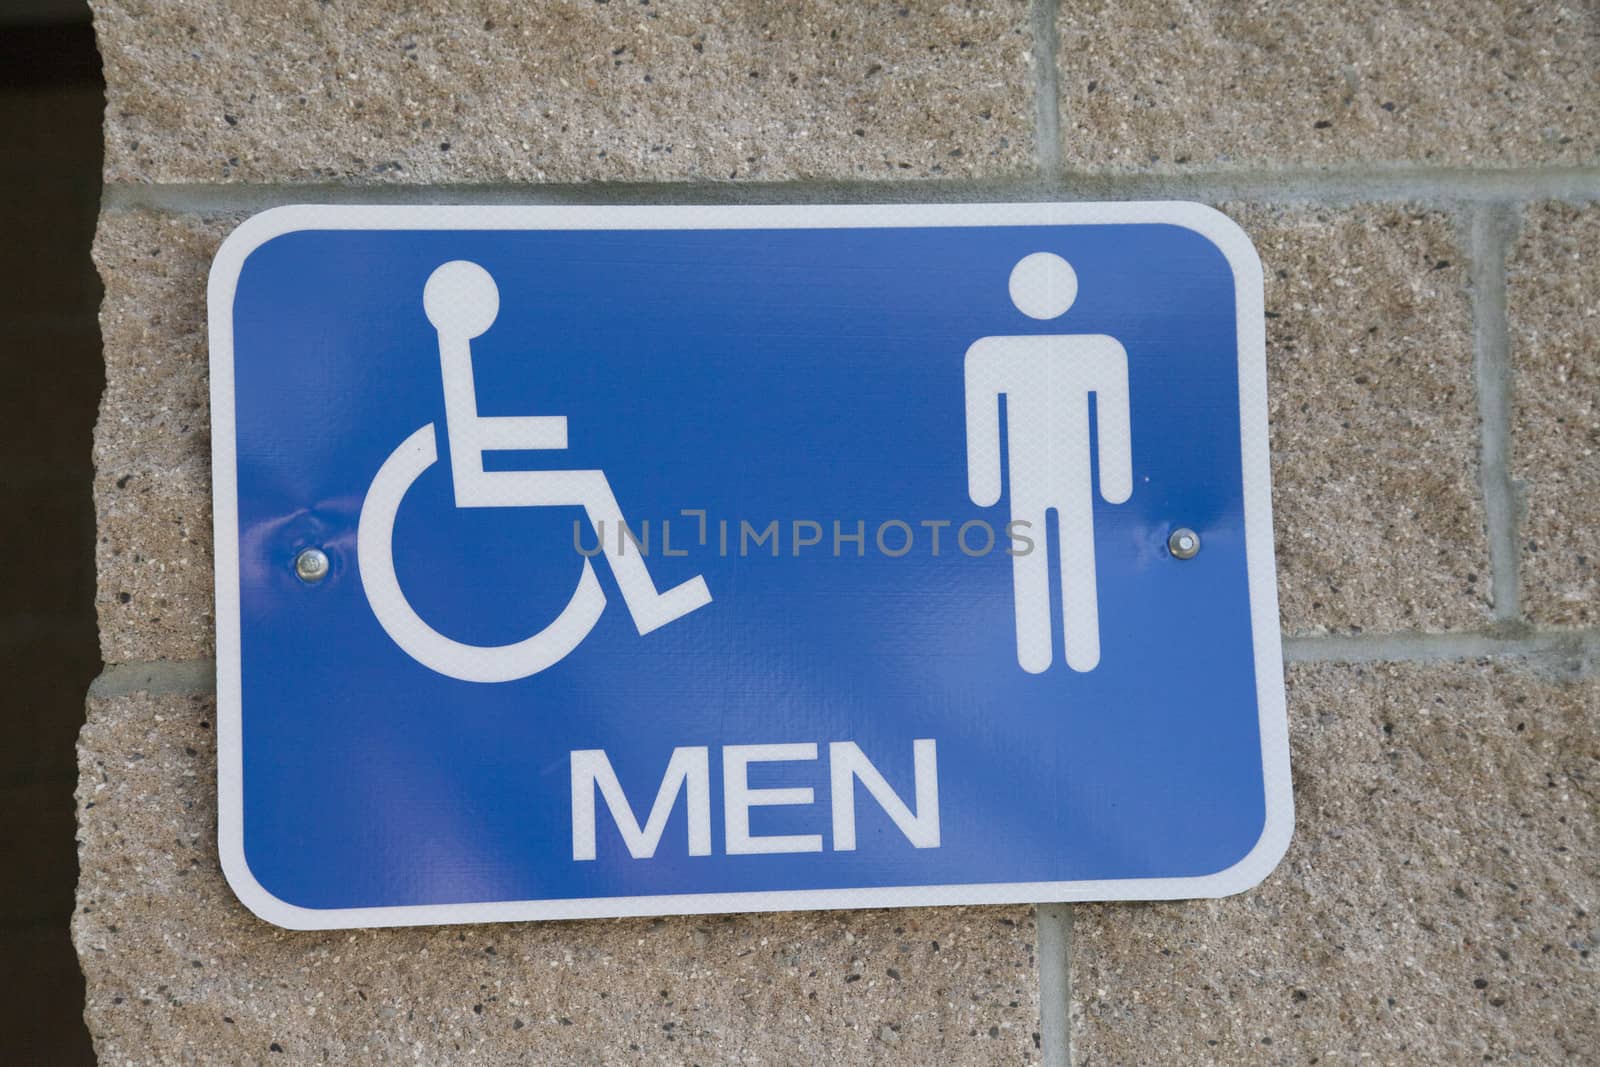 Blue men's restroom sign on wall outdoors